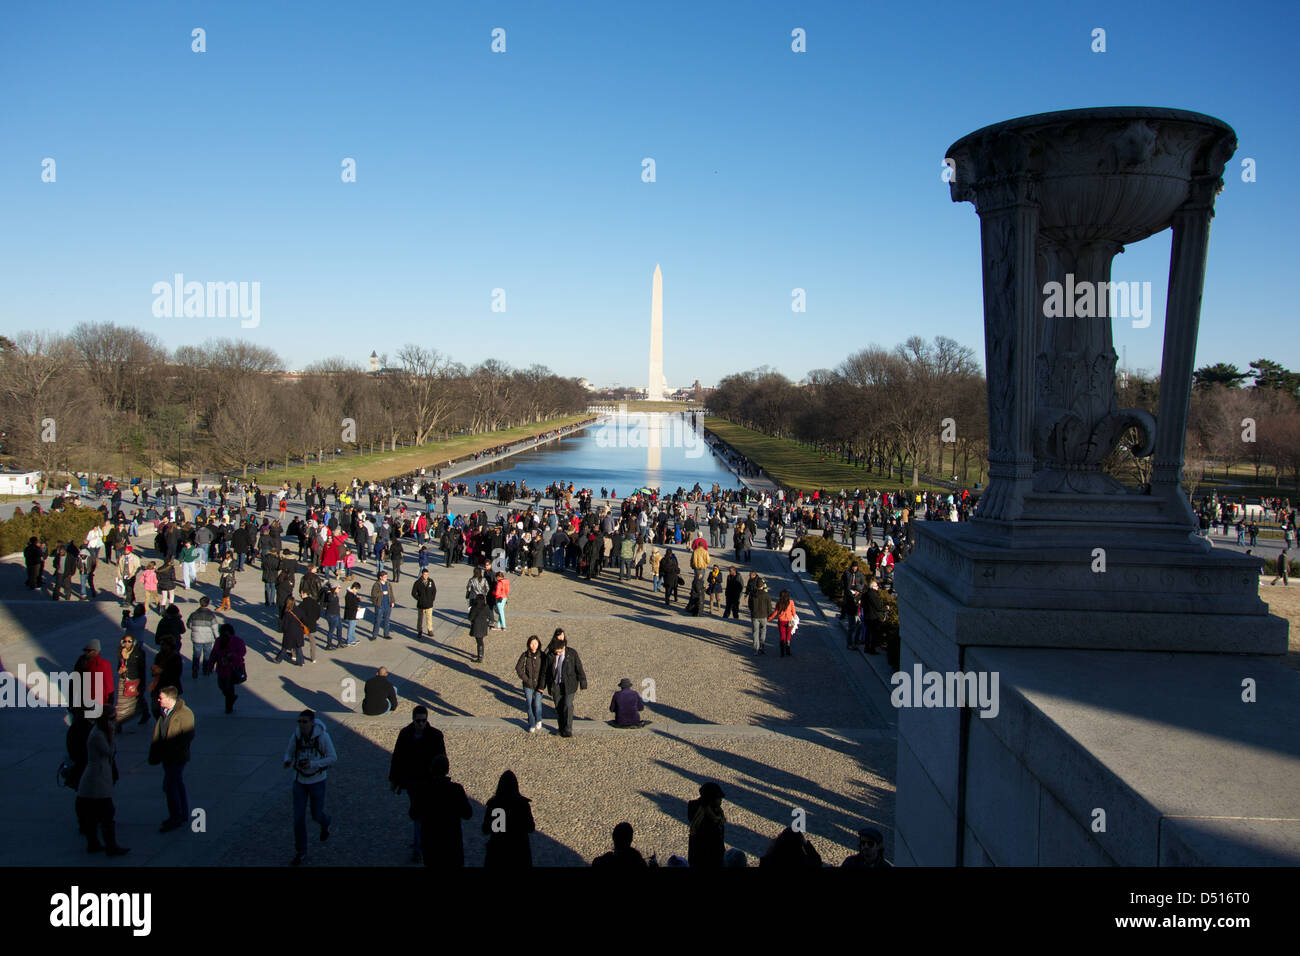 View of the National Mall from the Lincoln Memorial two days before 2013 presidential inauguration. Washington DC. Stock Photo